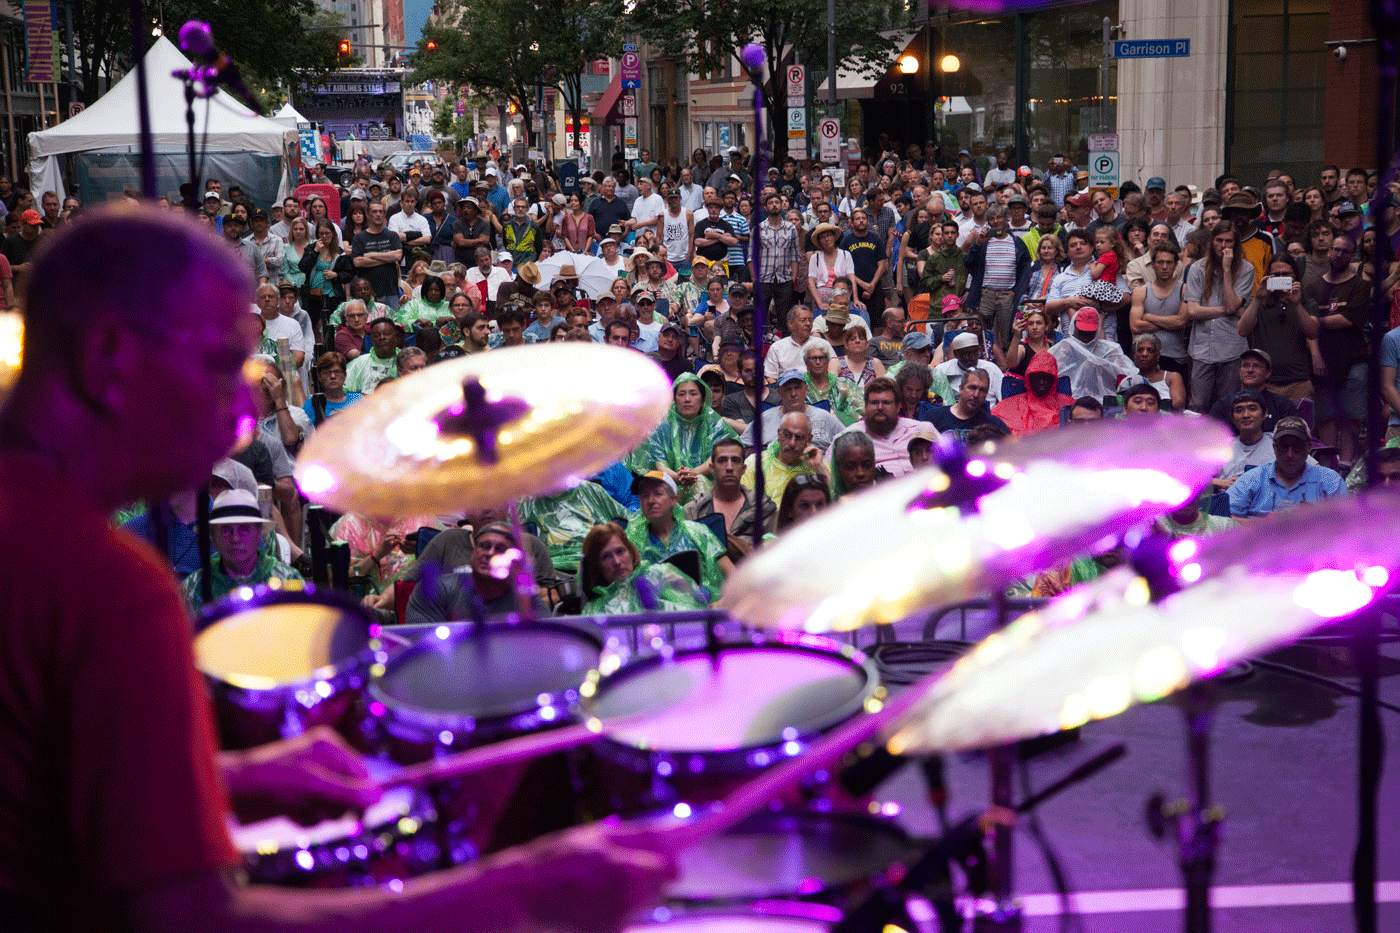 a drummer plays in front of a crowd